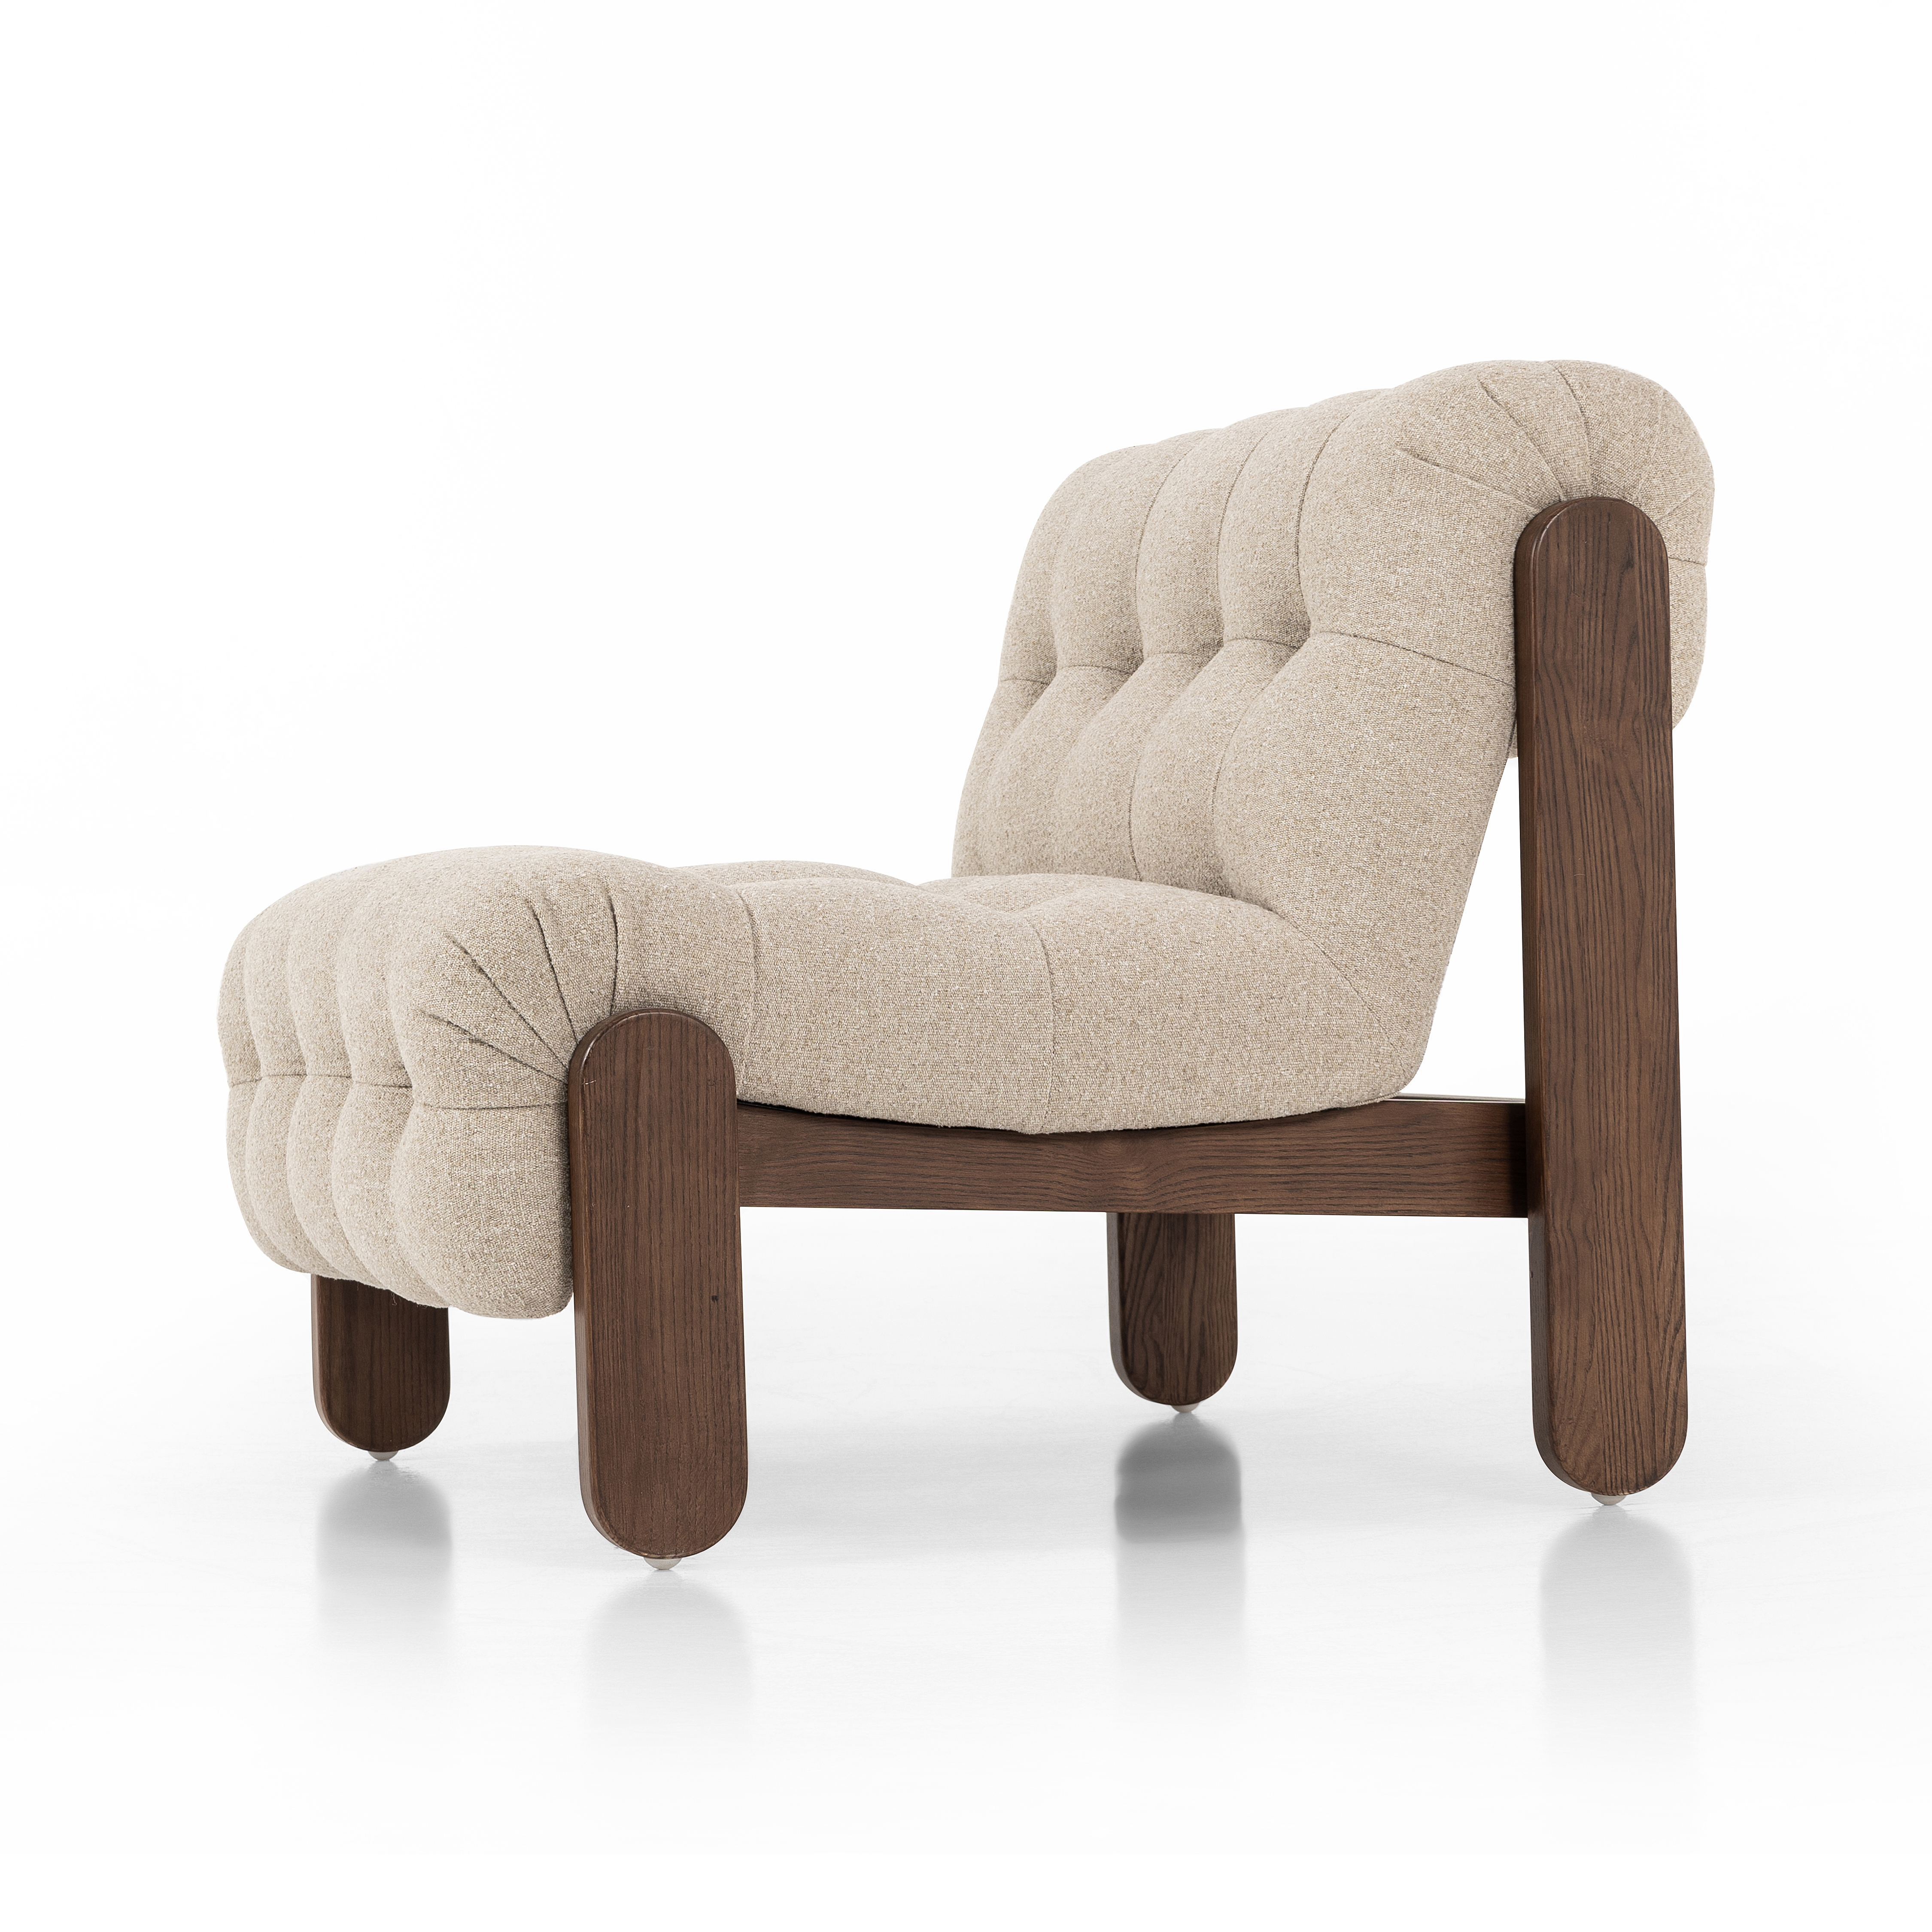 Jeremiah Chair-Weslie Flax - Image 2